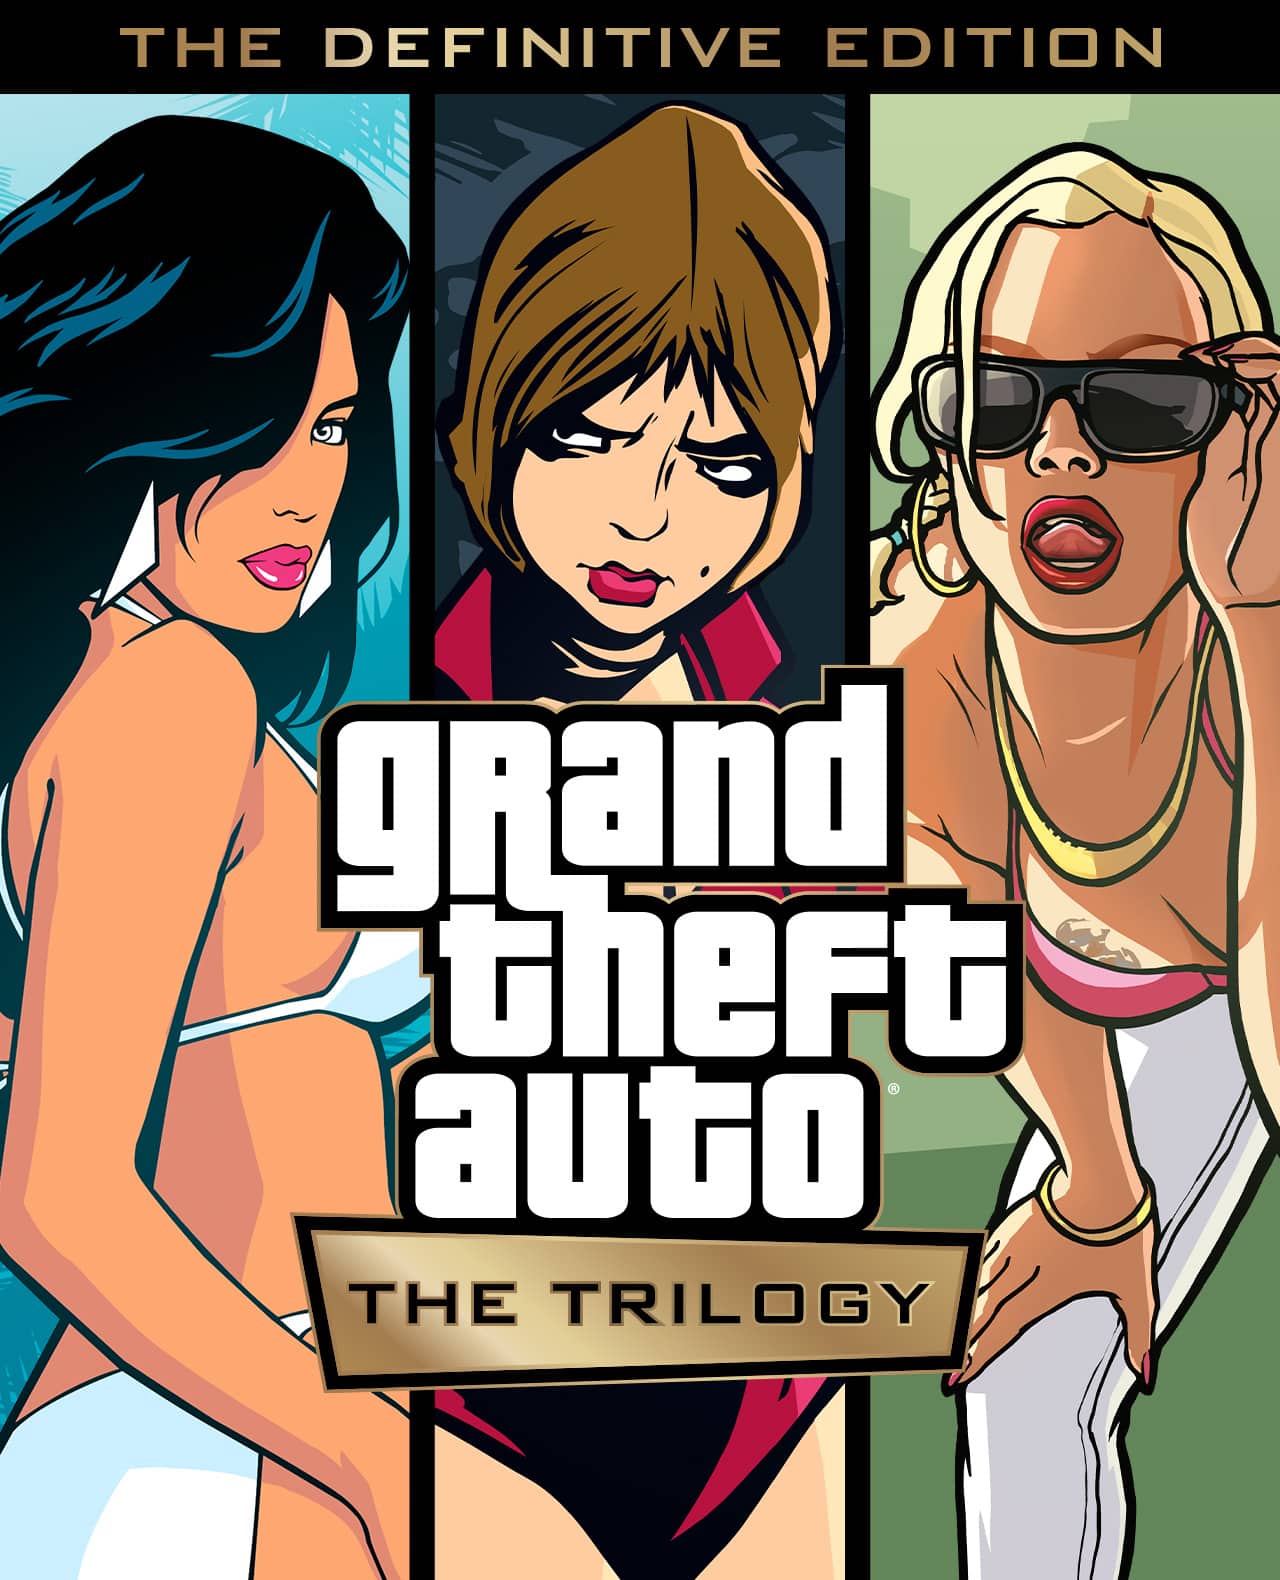 Cheat Grant Theft Auto Vice City&San Andreas For PS2, PDF, Leisure